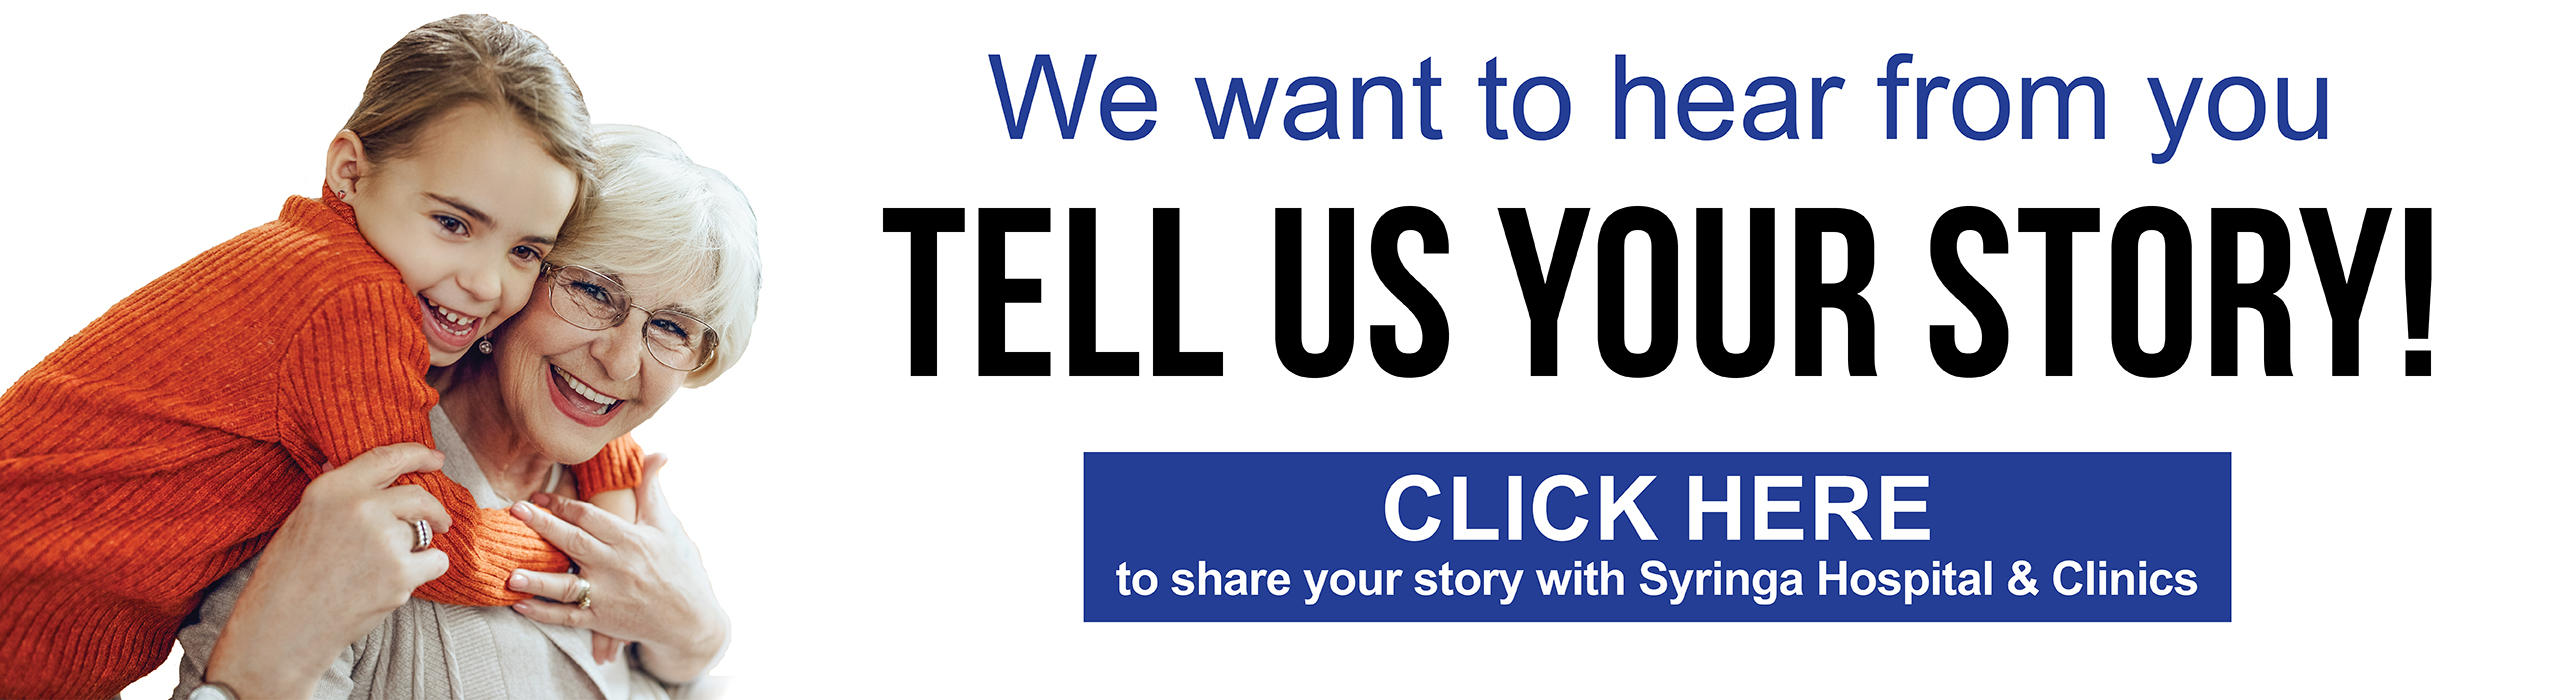 We want to hear from you
TELL US YOUR STORY!

CLICK HERE
to share your story with Syringa Hospital & Clinics